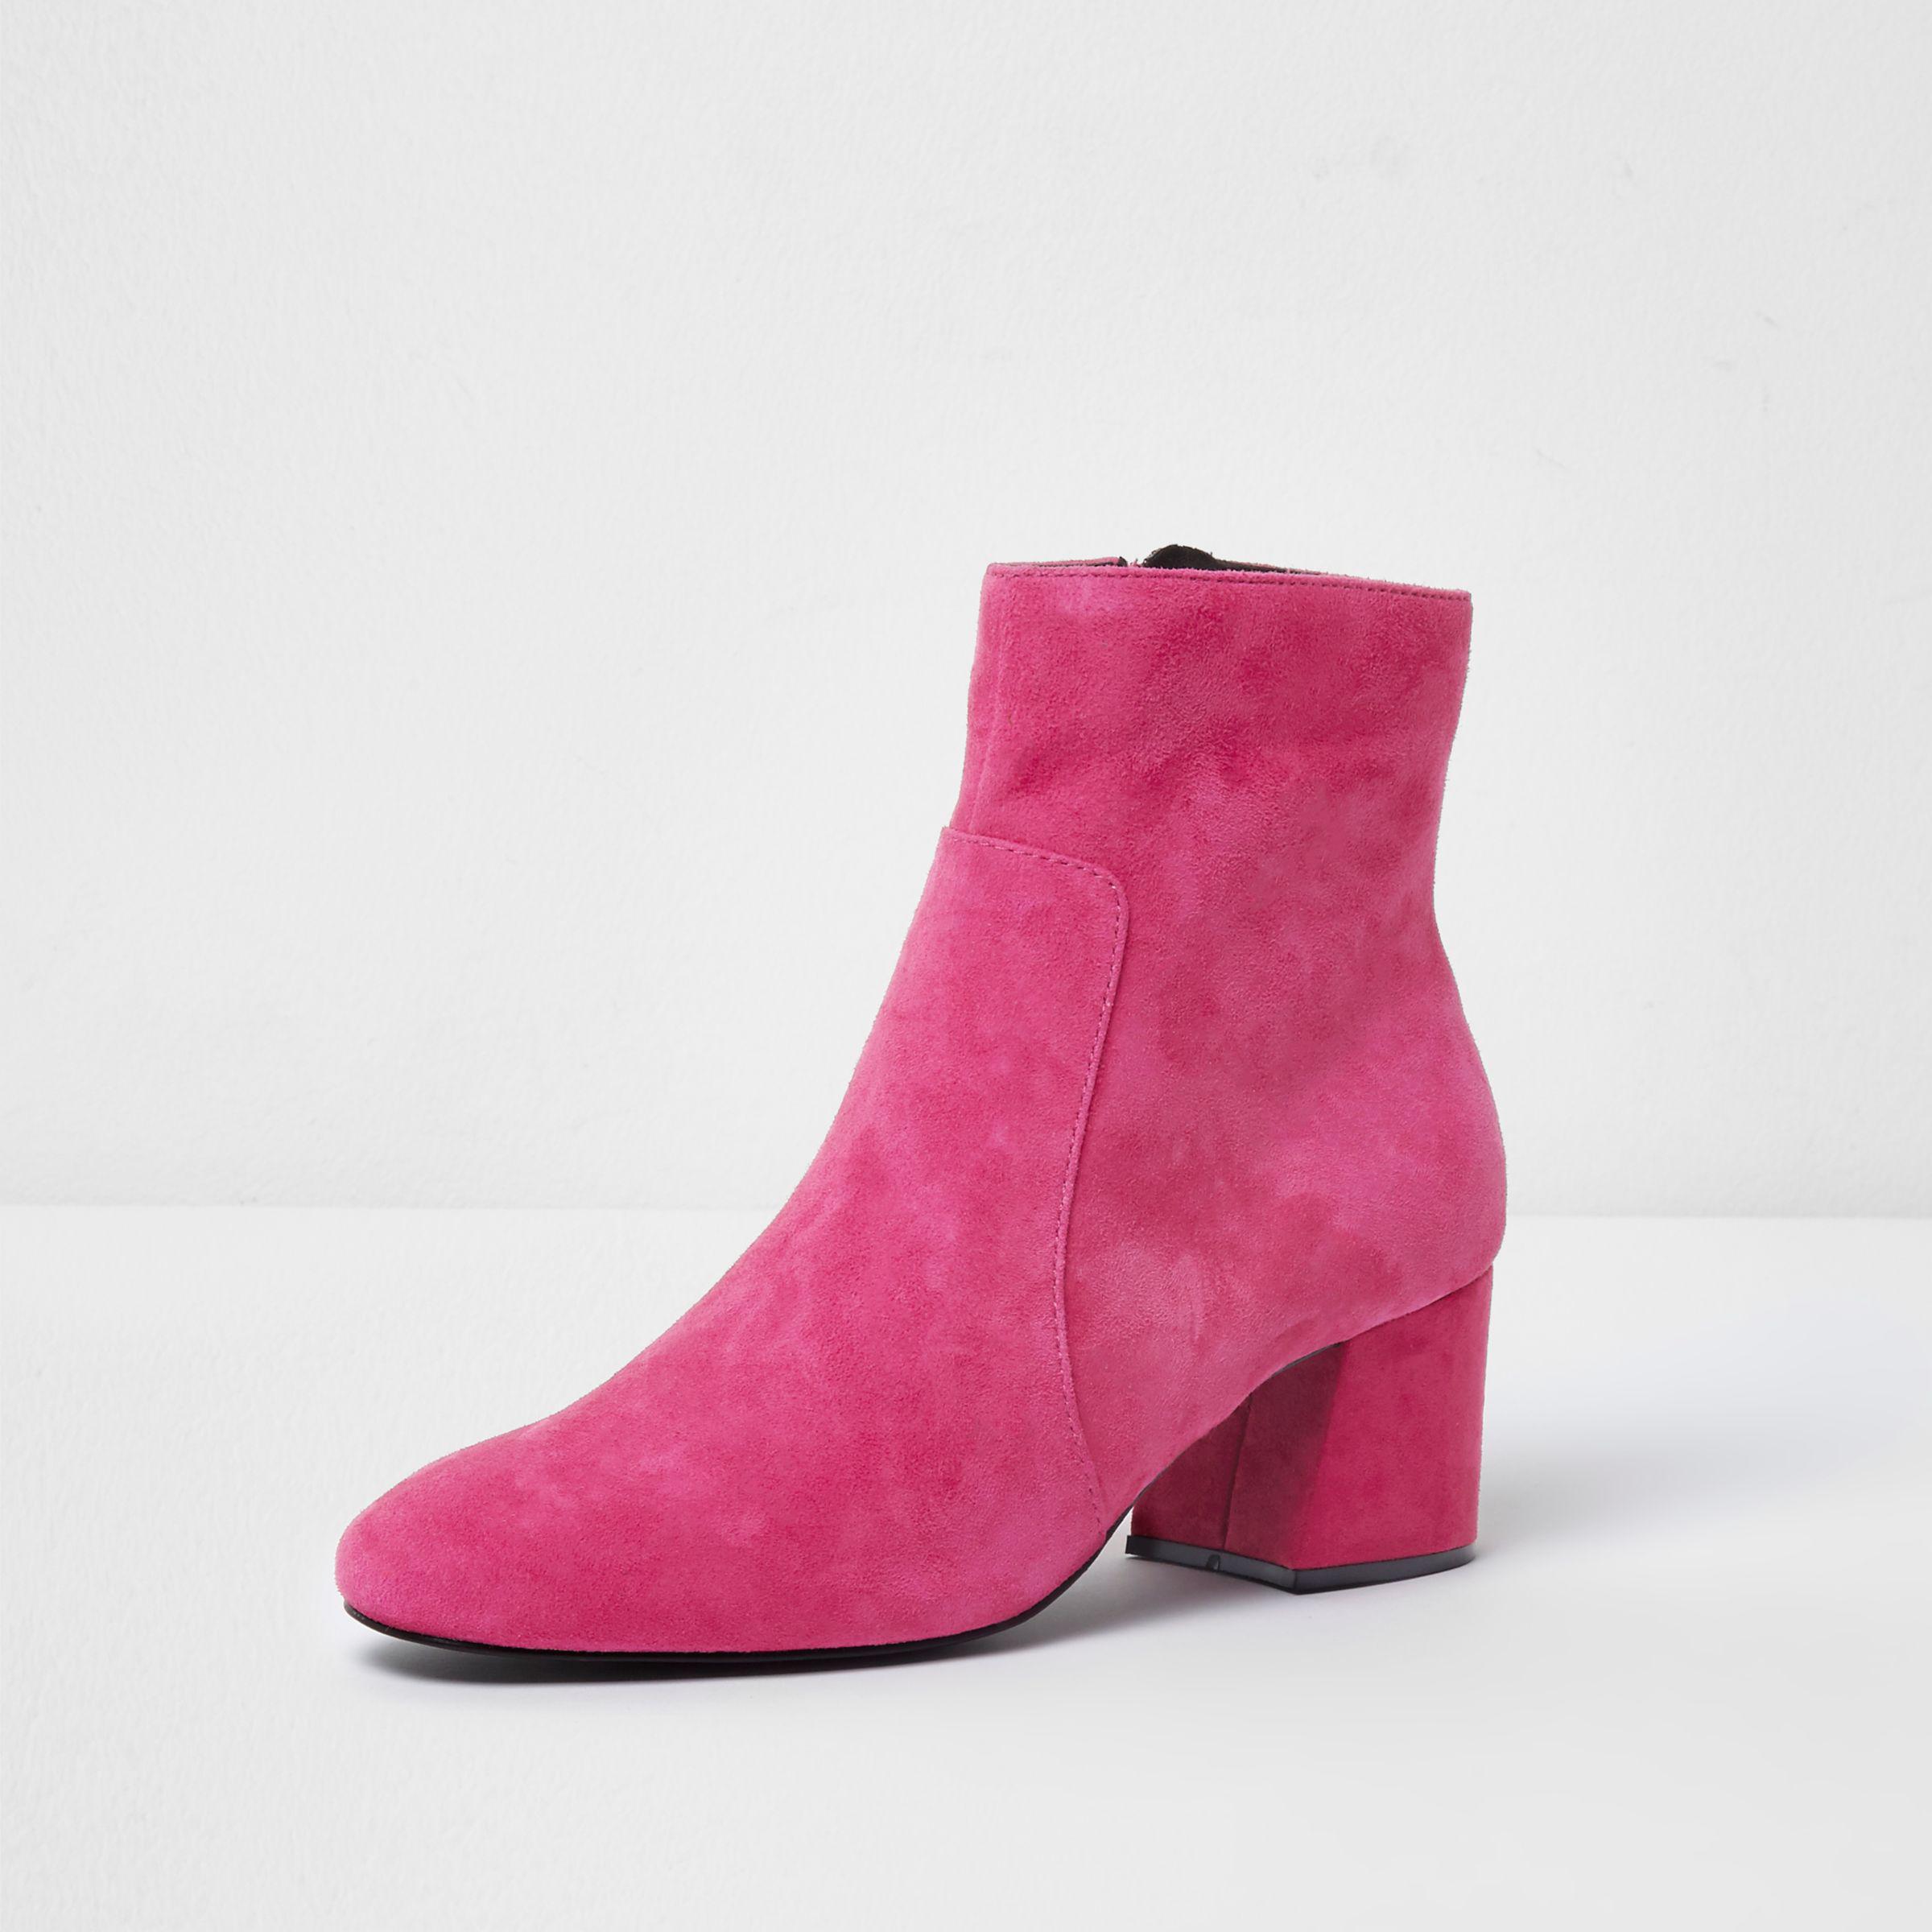 River Island Pink Block Heel Suede Ankle Boots | Lyst